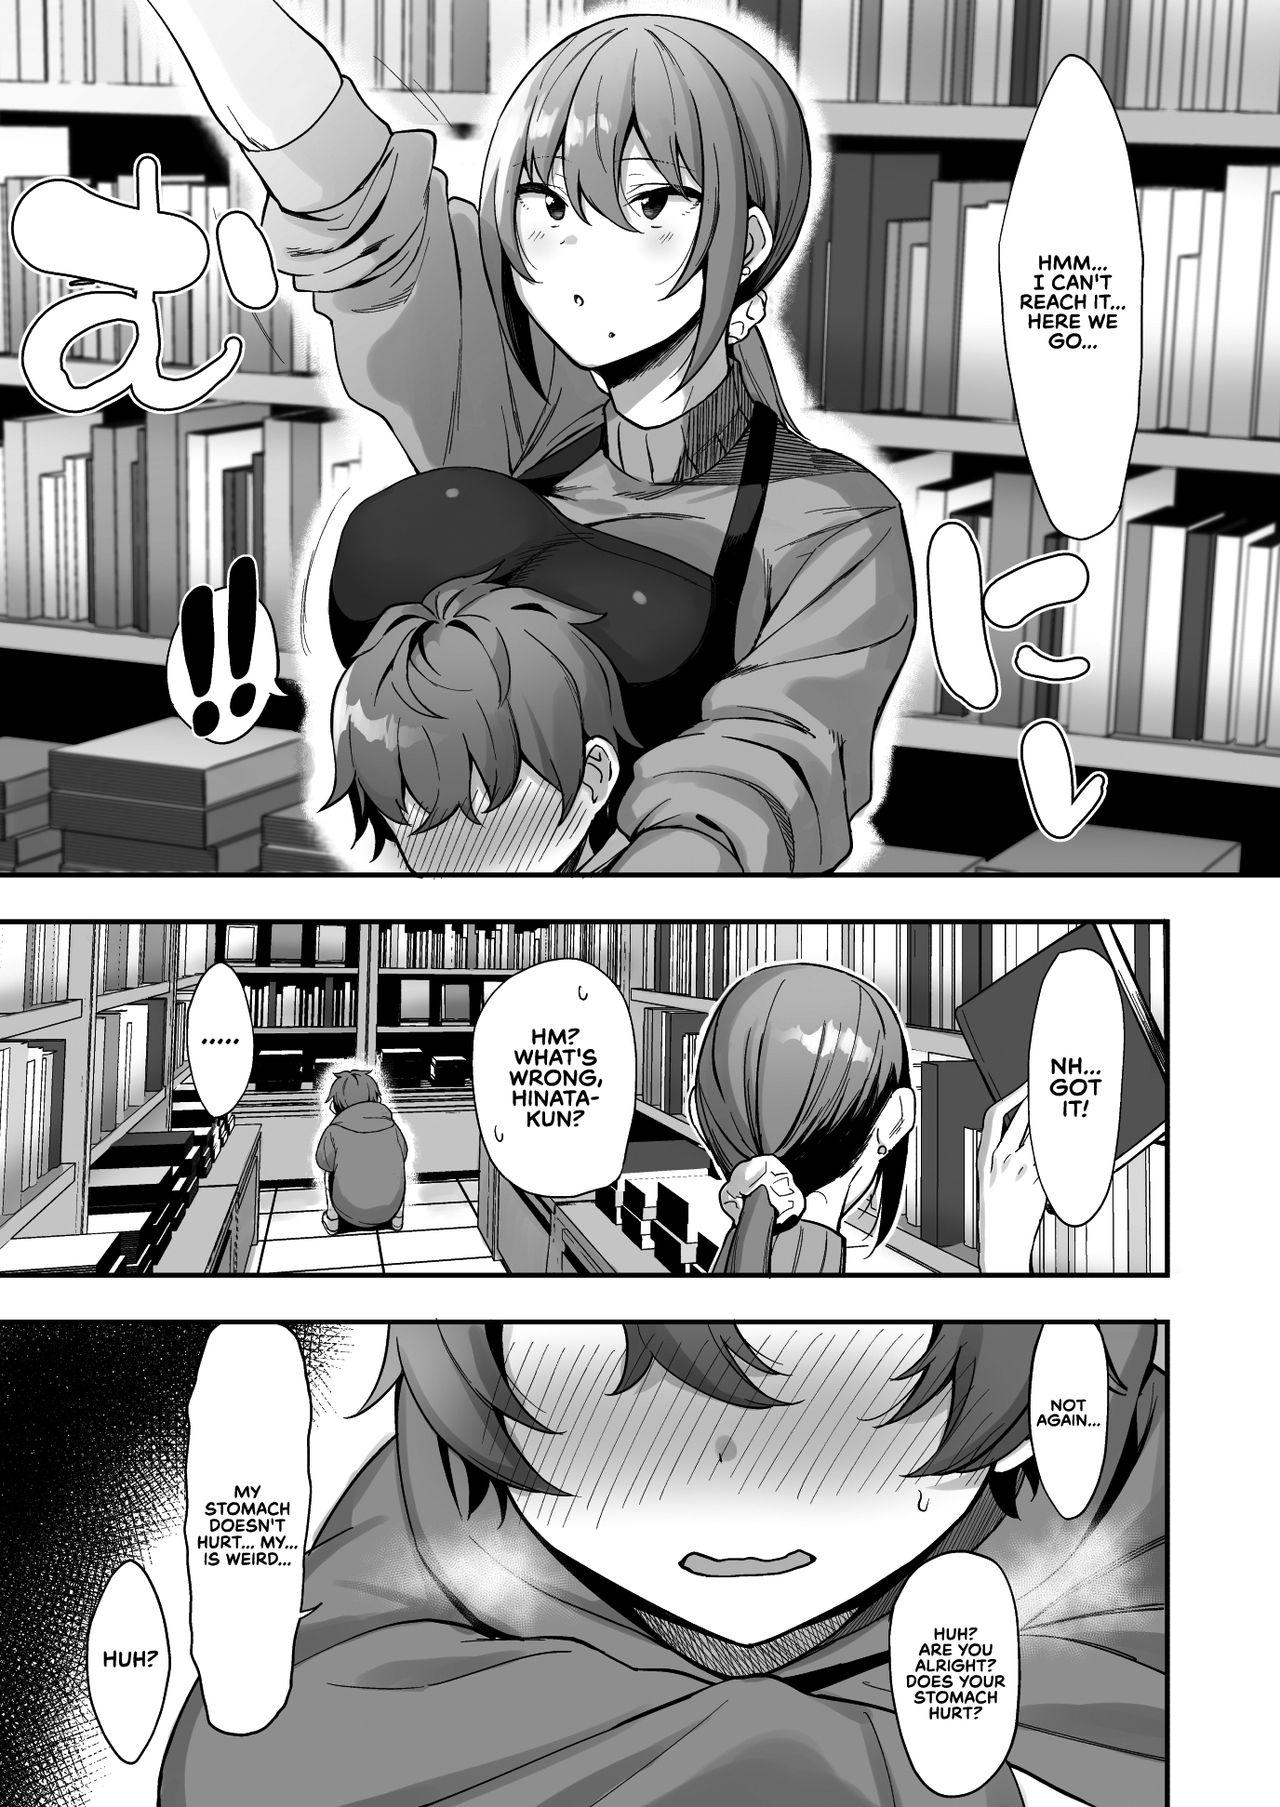 Periscope Furuhonya no Onee-san to | With The Lady From The Used Book Shop - Original Hardfuck - Page 8